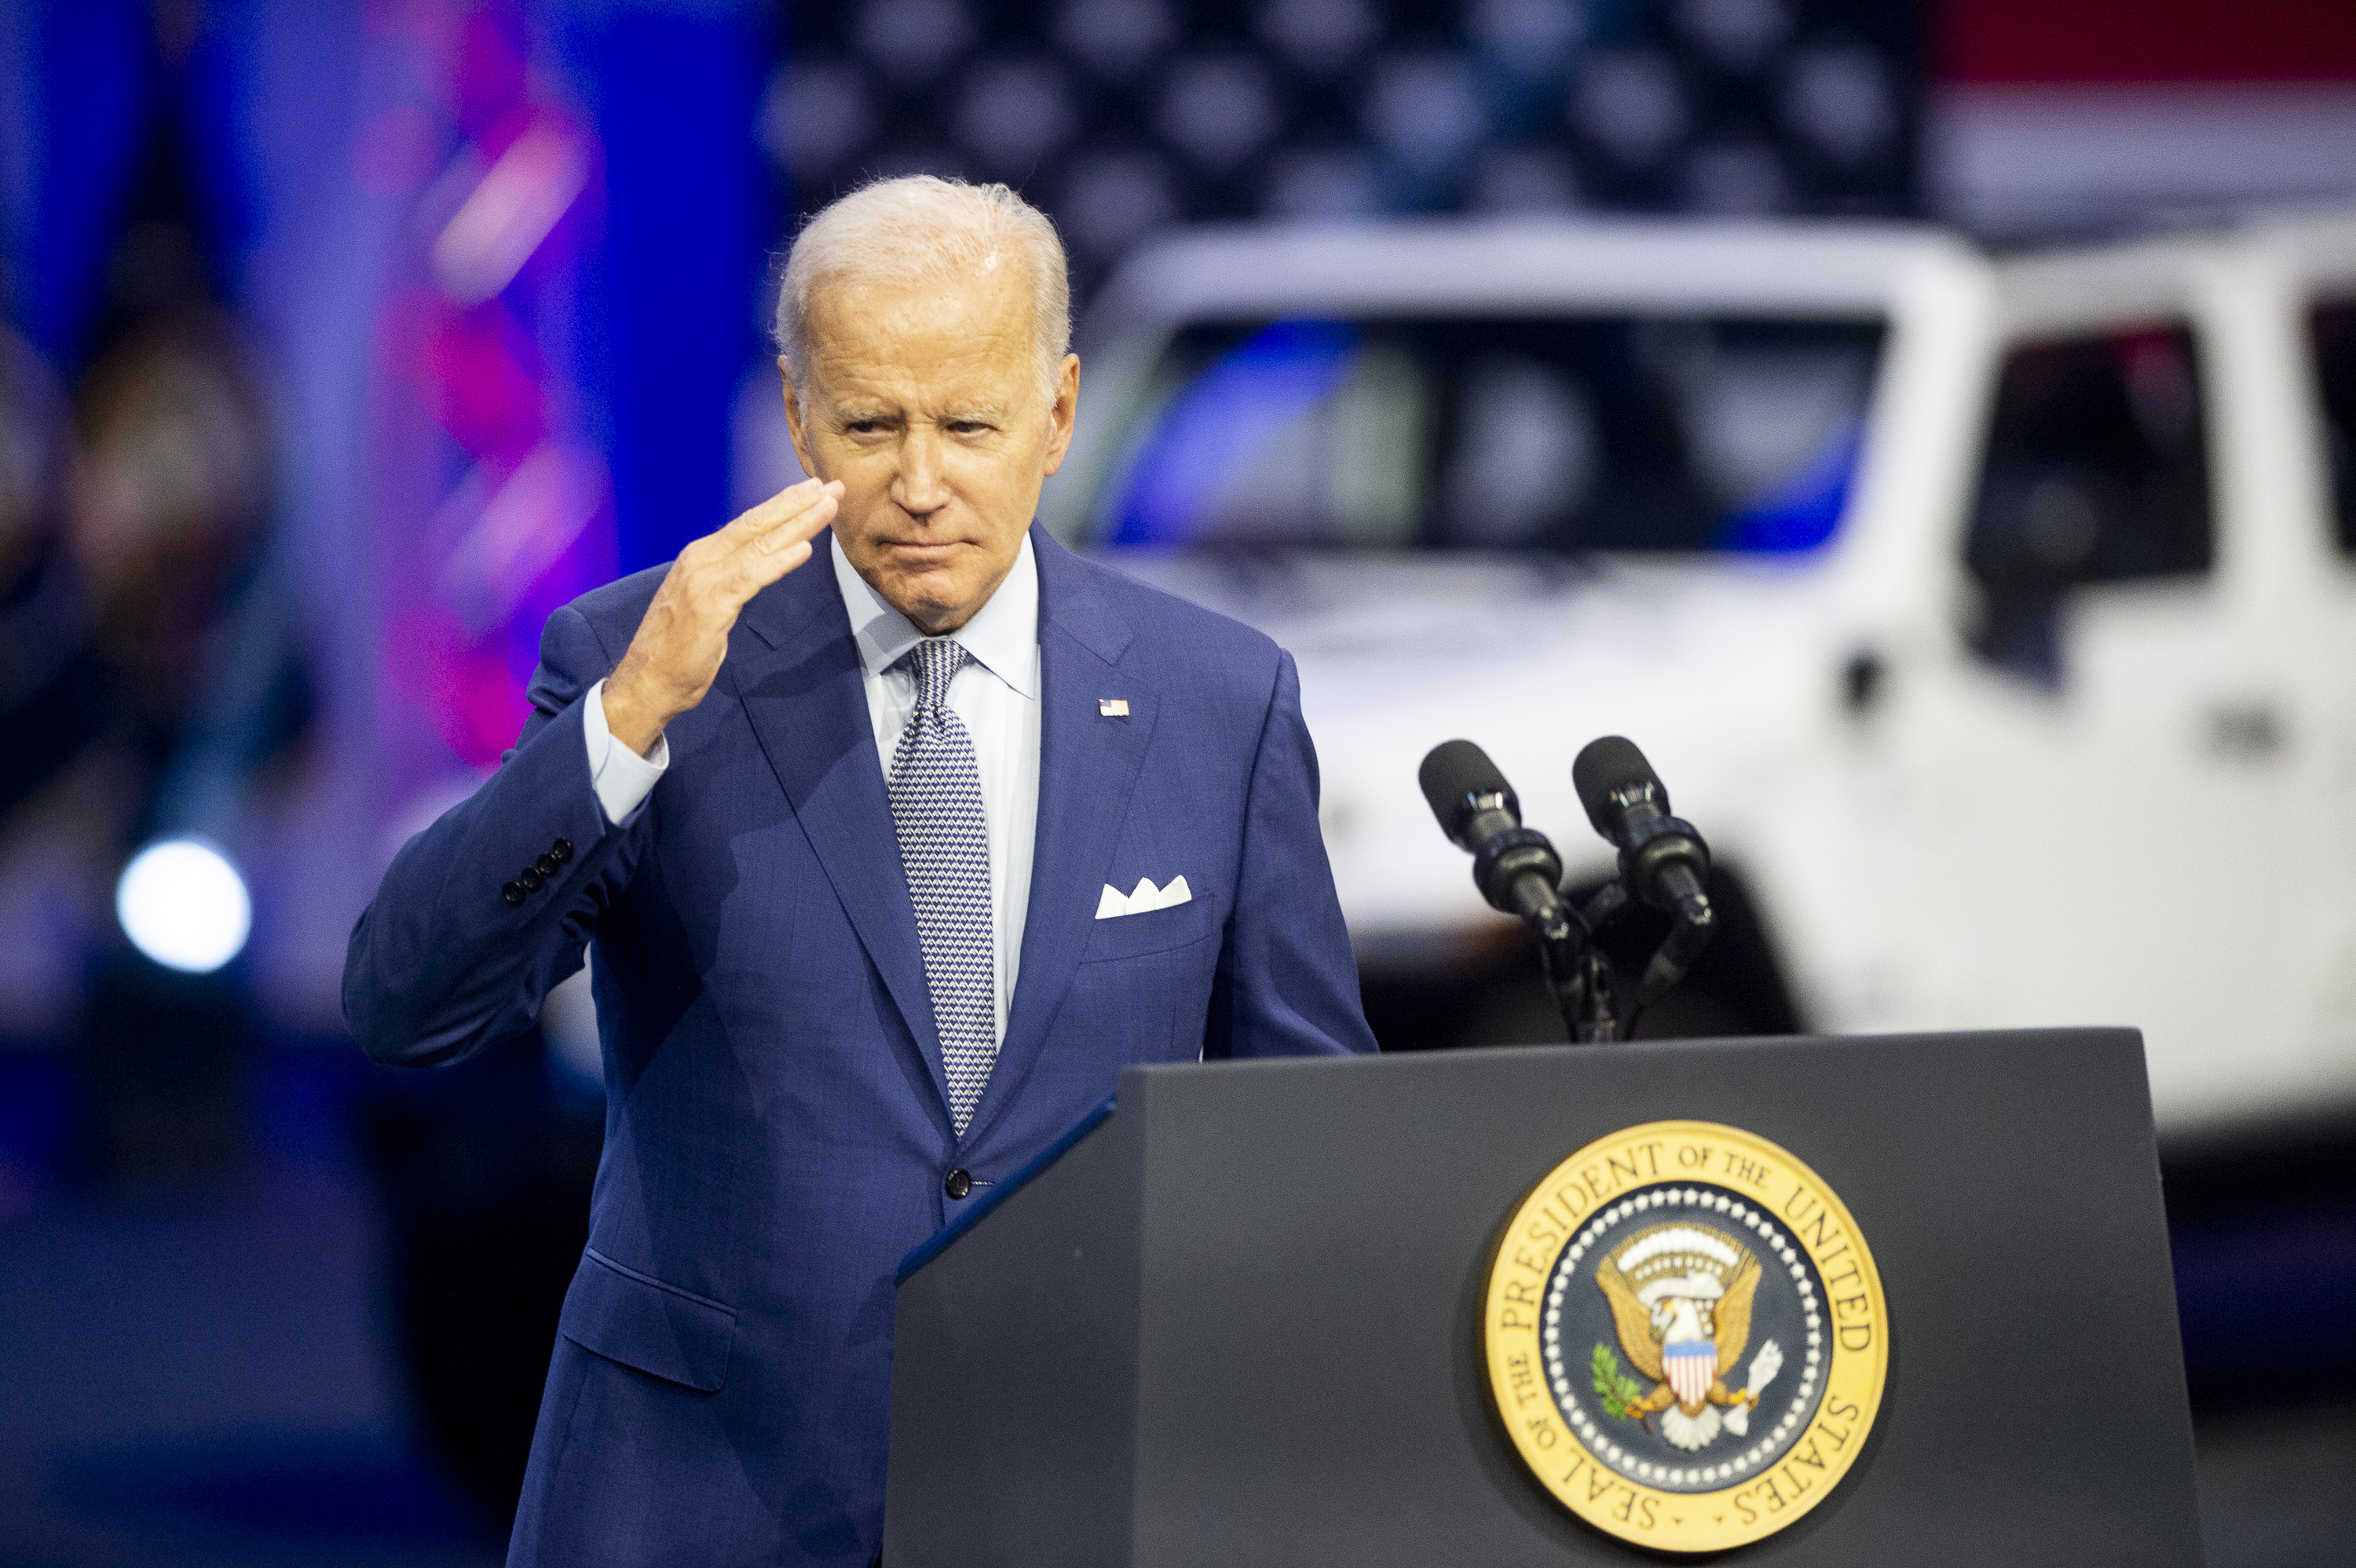 U.S. President Joe Biden salutes after speaking during the 2022 North American International Auto Show at Huntington Place in Detroit on Wednesday, Sept. 14 2022.